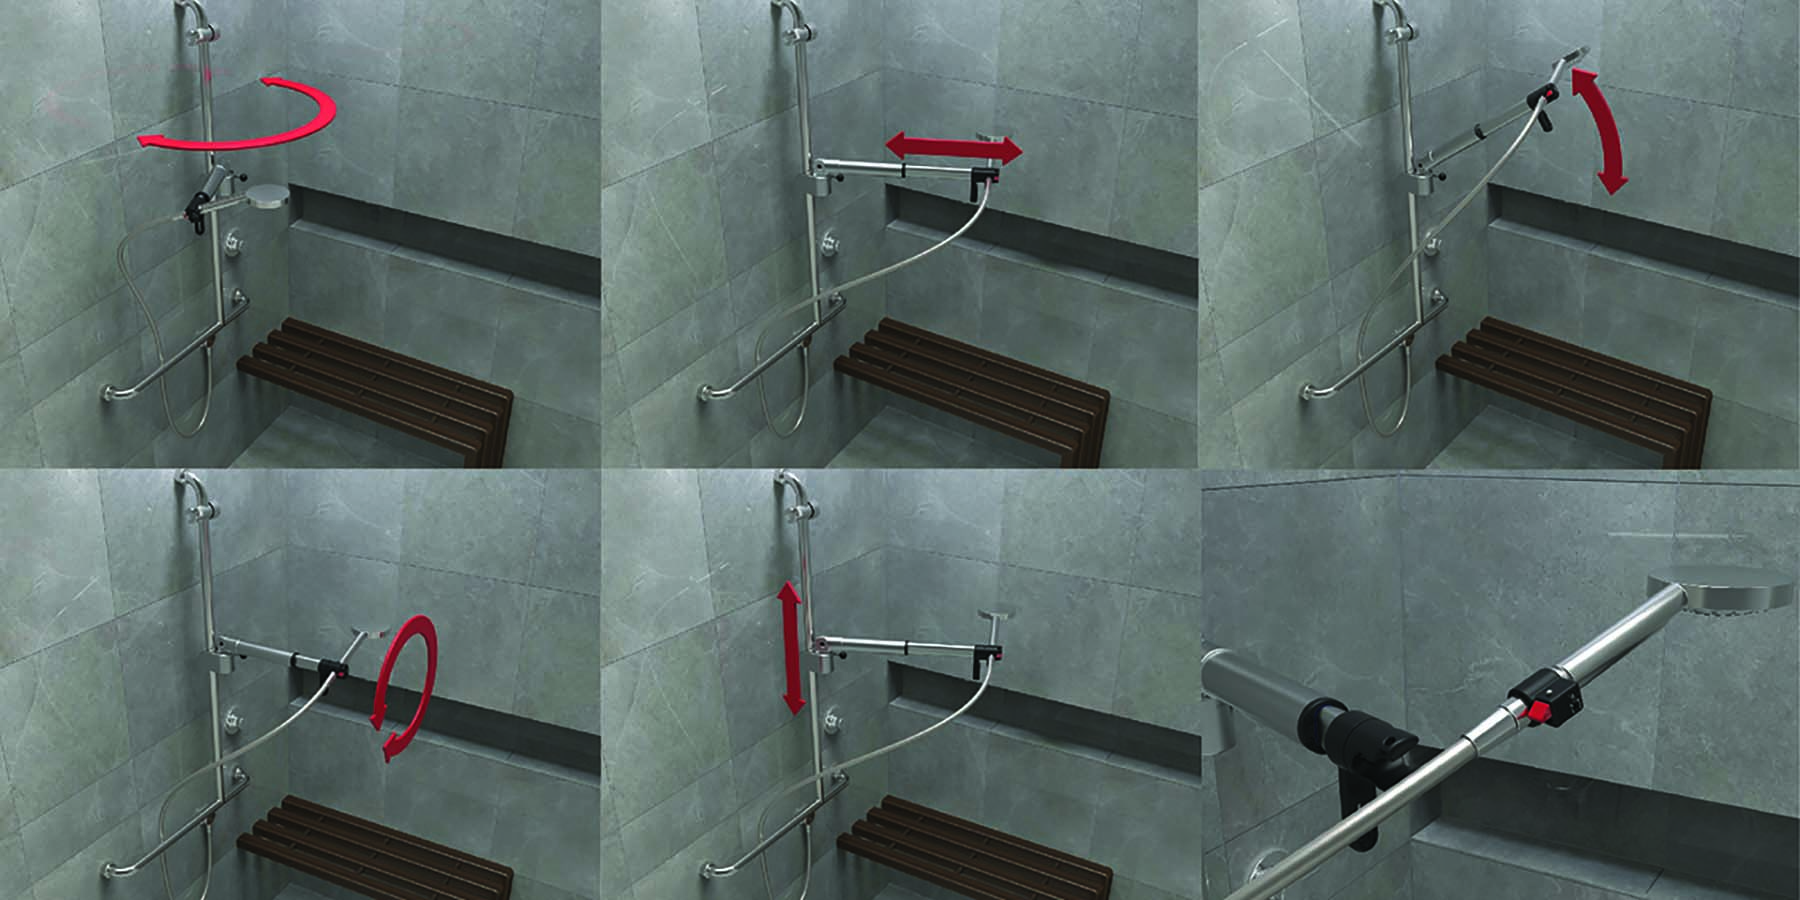 6 tiled images showing the range of movement of the telescopic shower holder with red arrows indicating movement direction